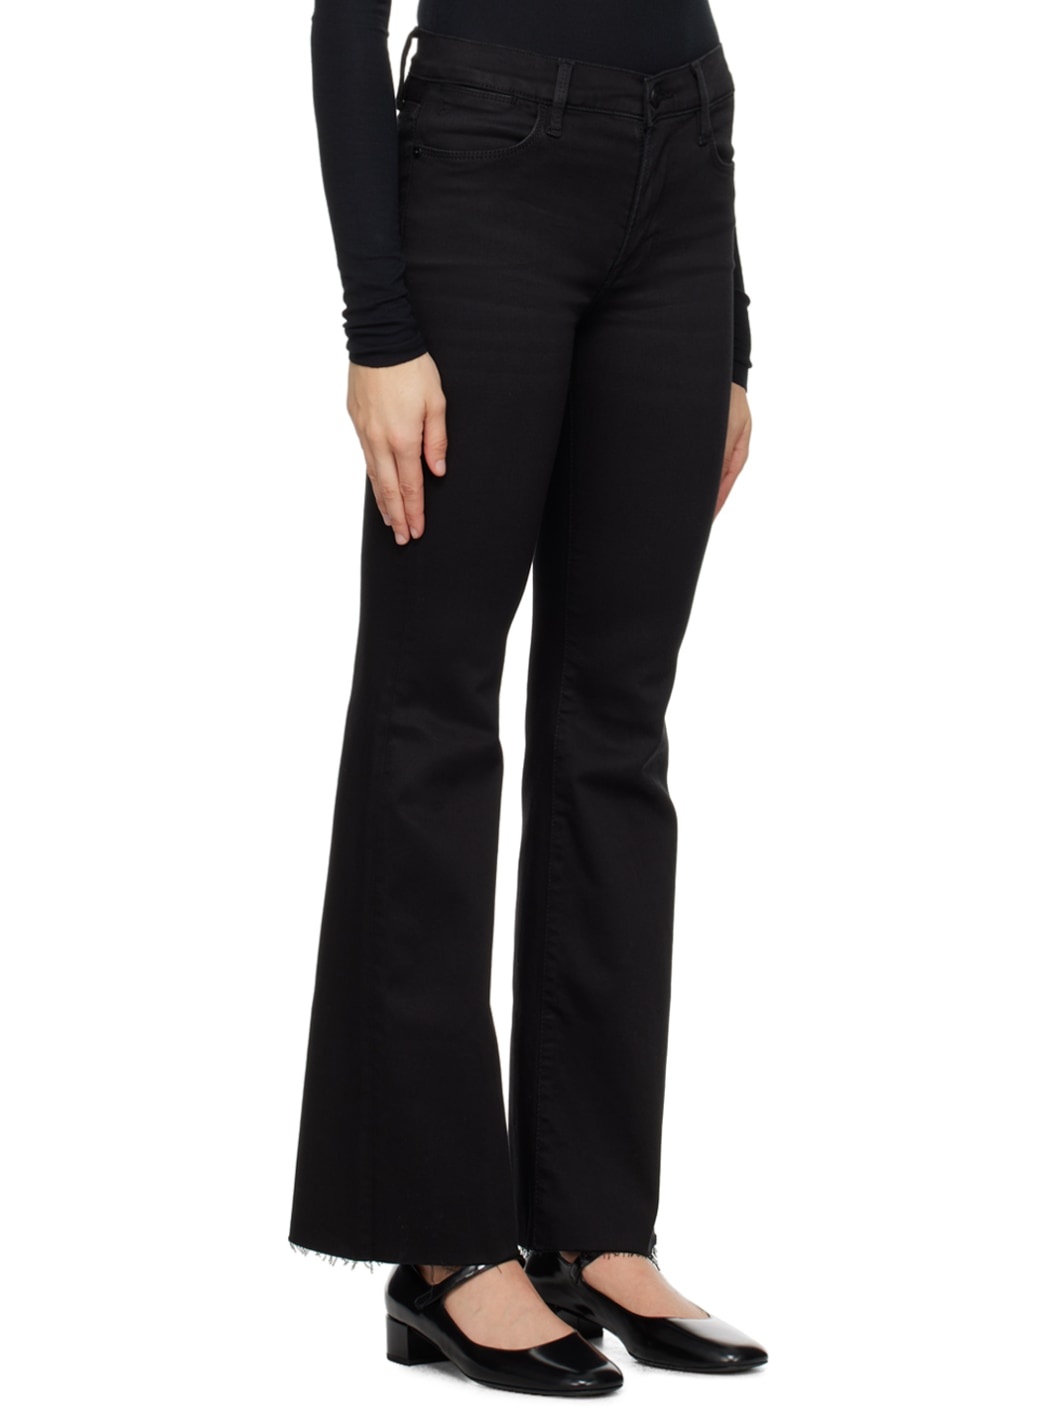 Black 'Le Easy Flare' Jeans - 2